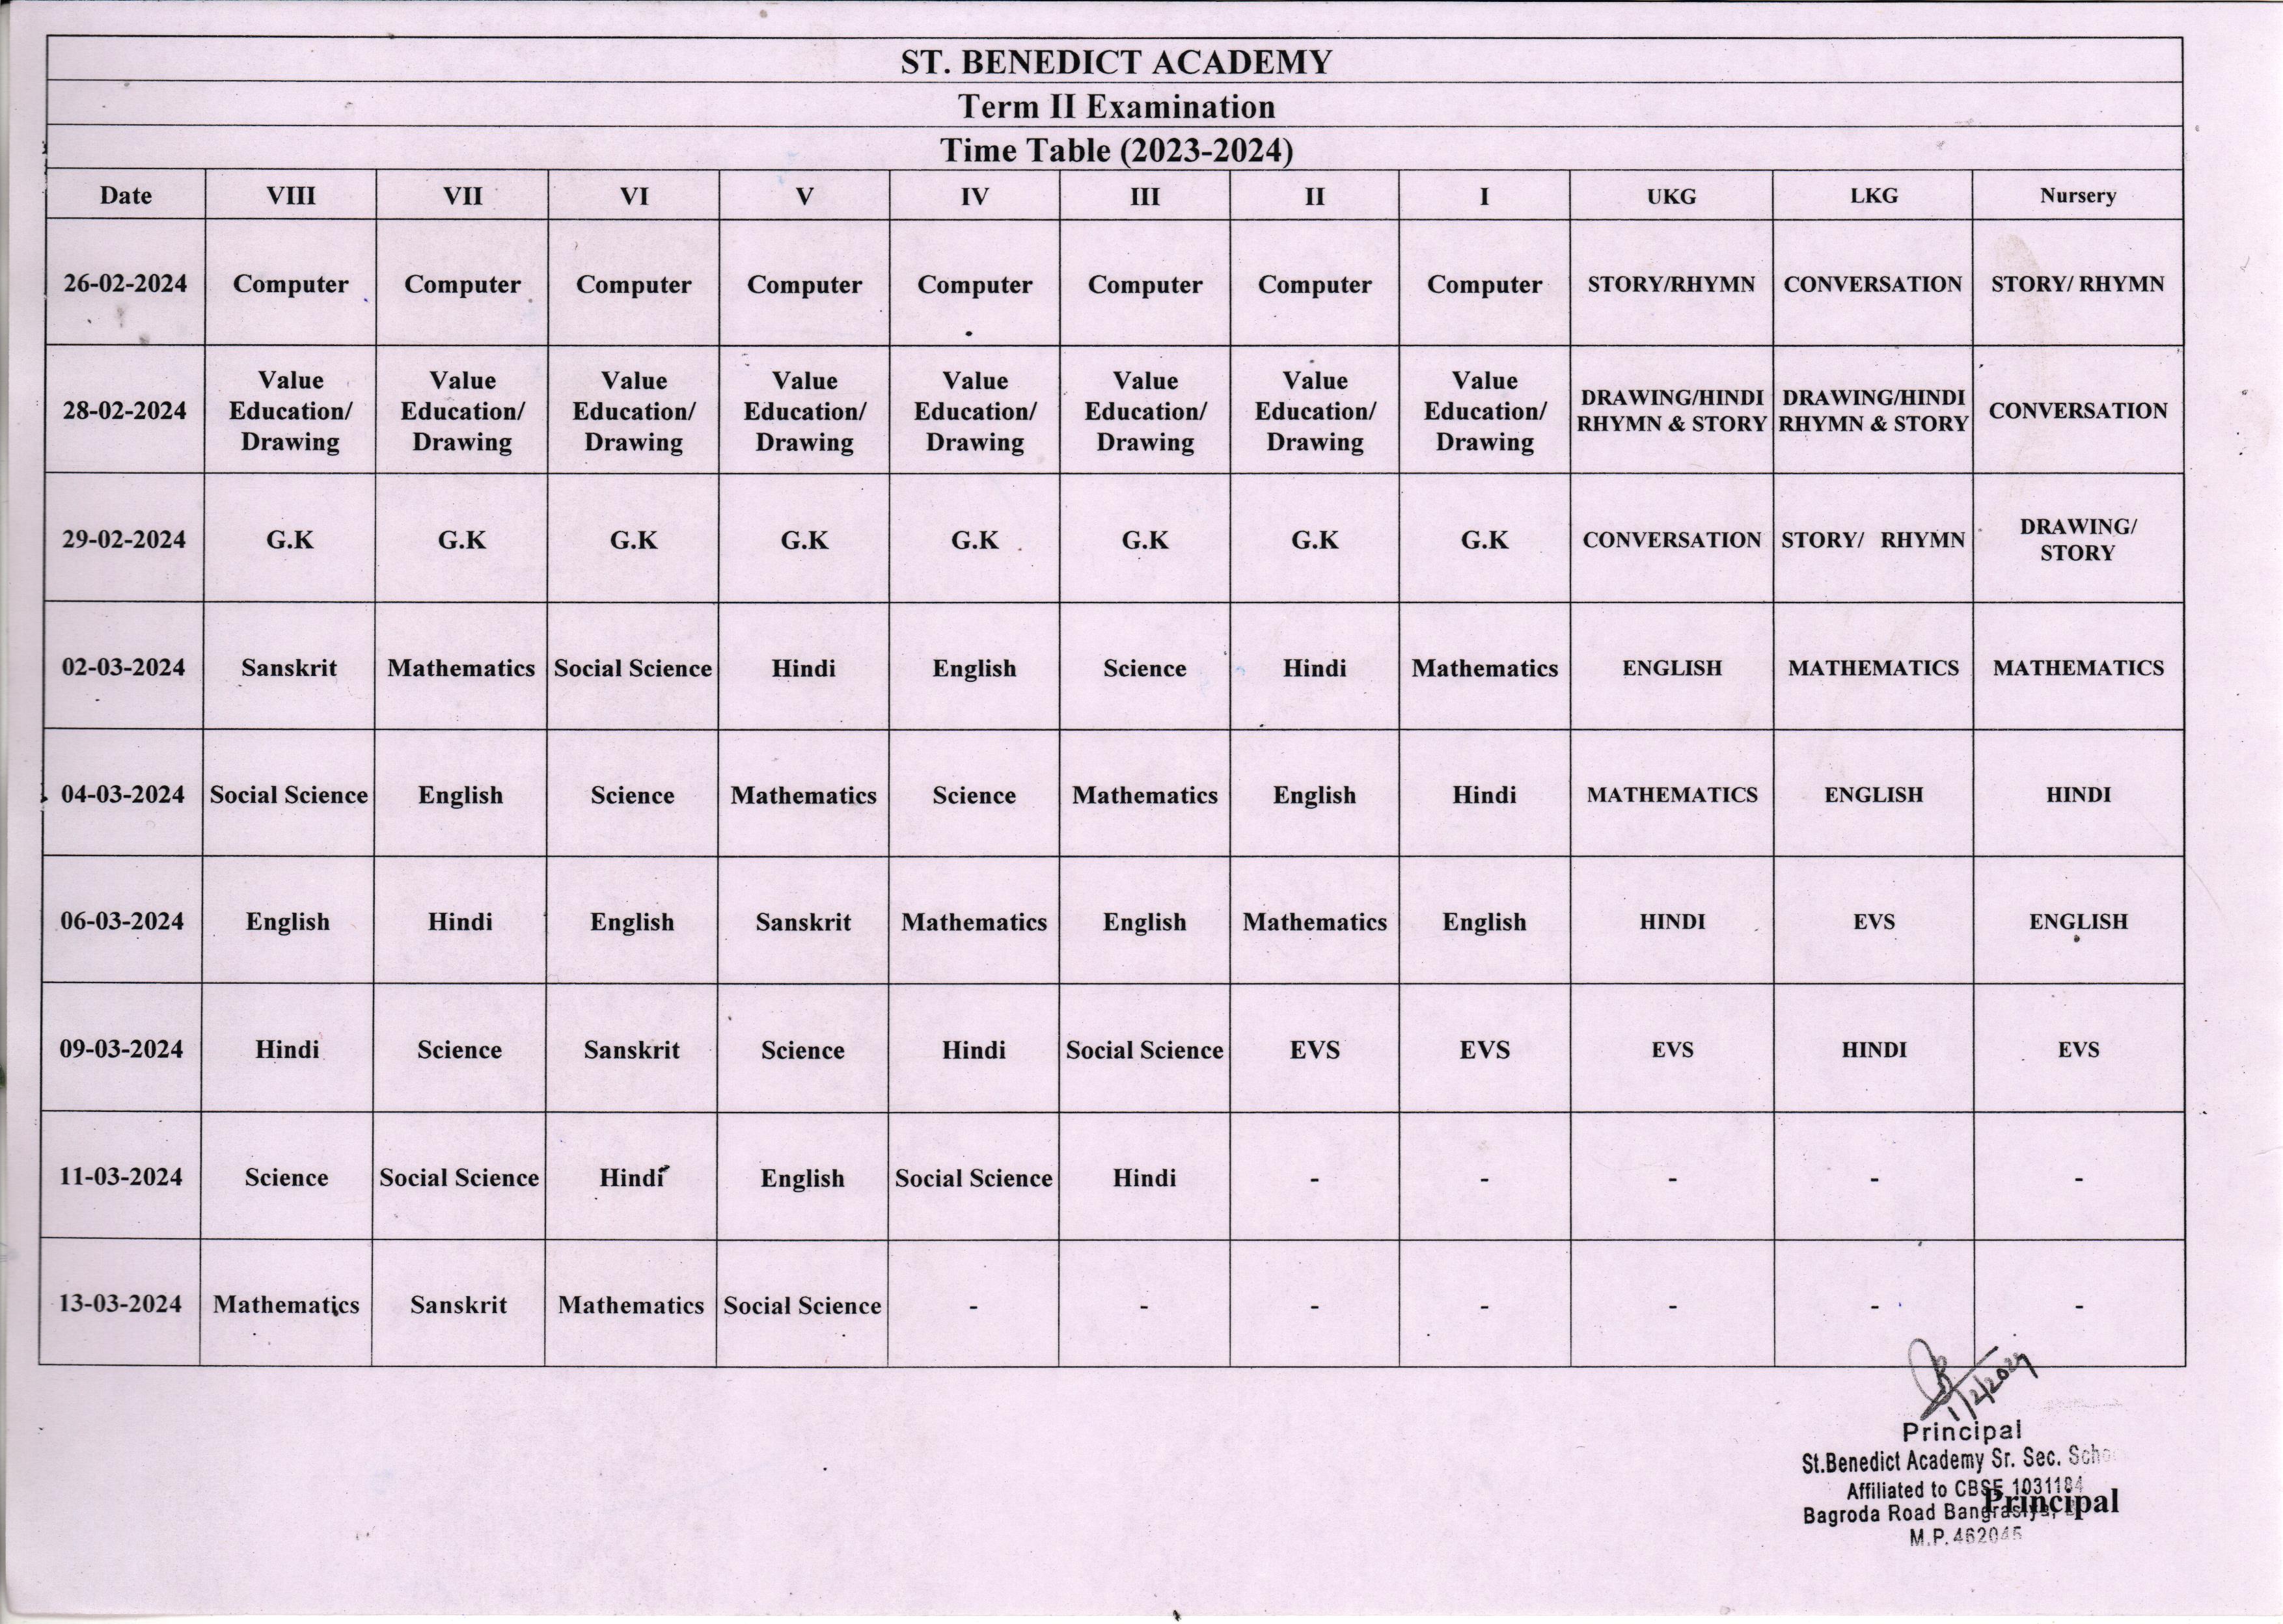 Annual Examination Time Table (2023-2024)